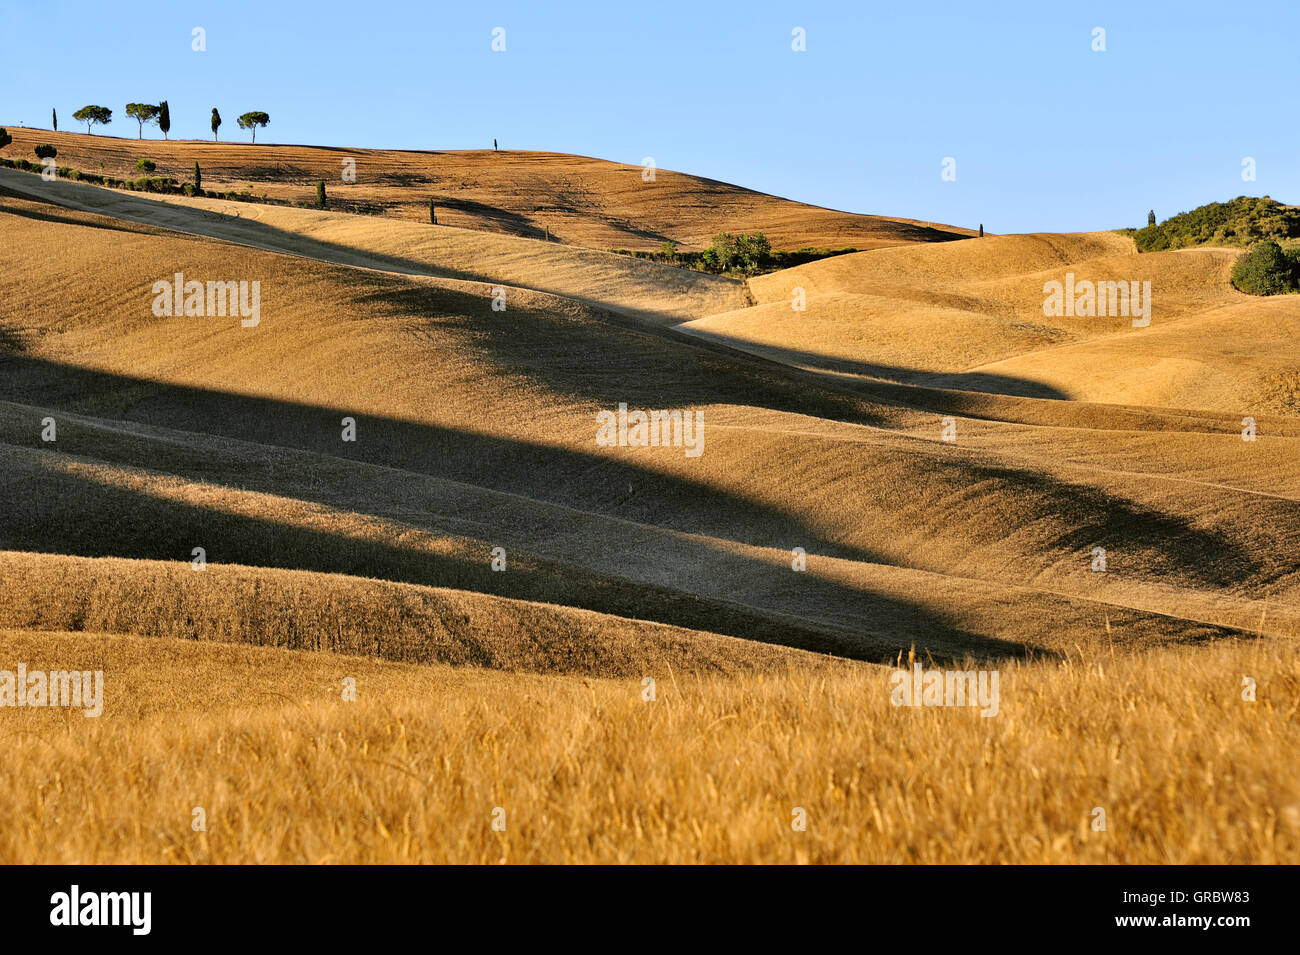 Cornfields On Rolling Hills With Long Shadows, Impression Of Dunes In Evening Light, Tuscany, Italy Stock Photo